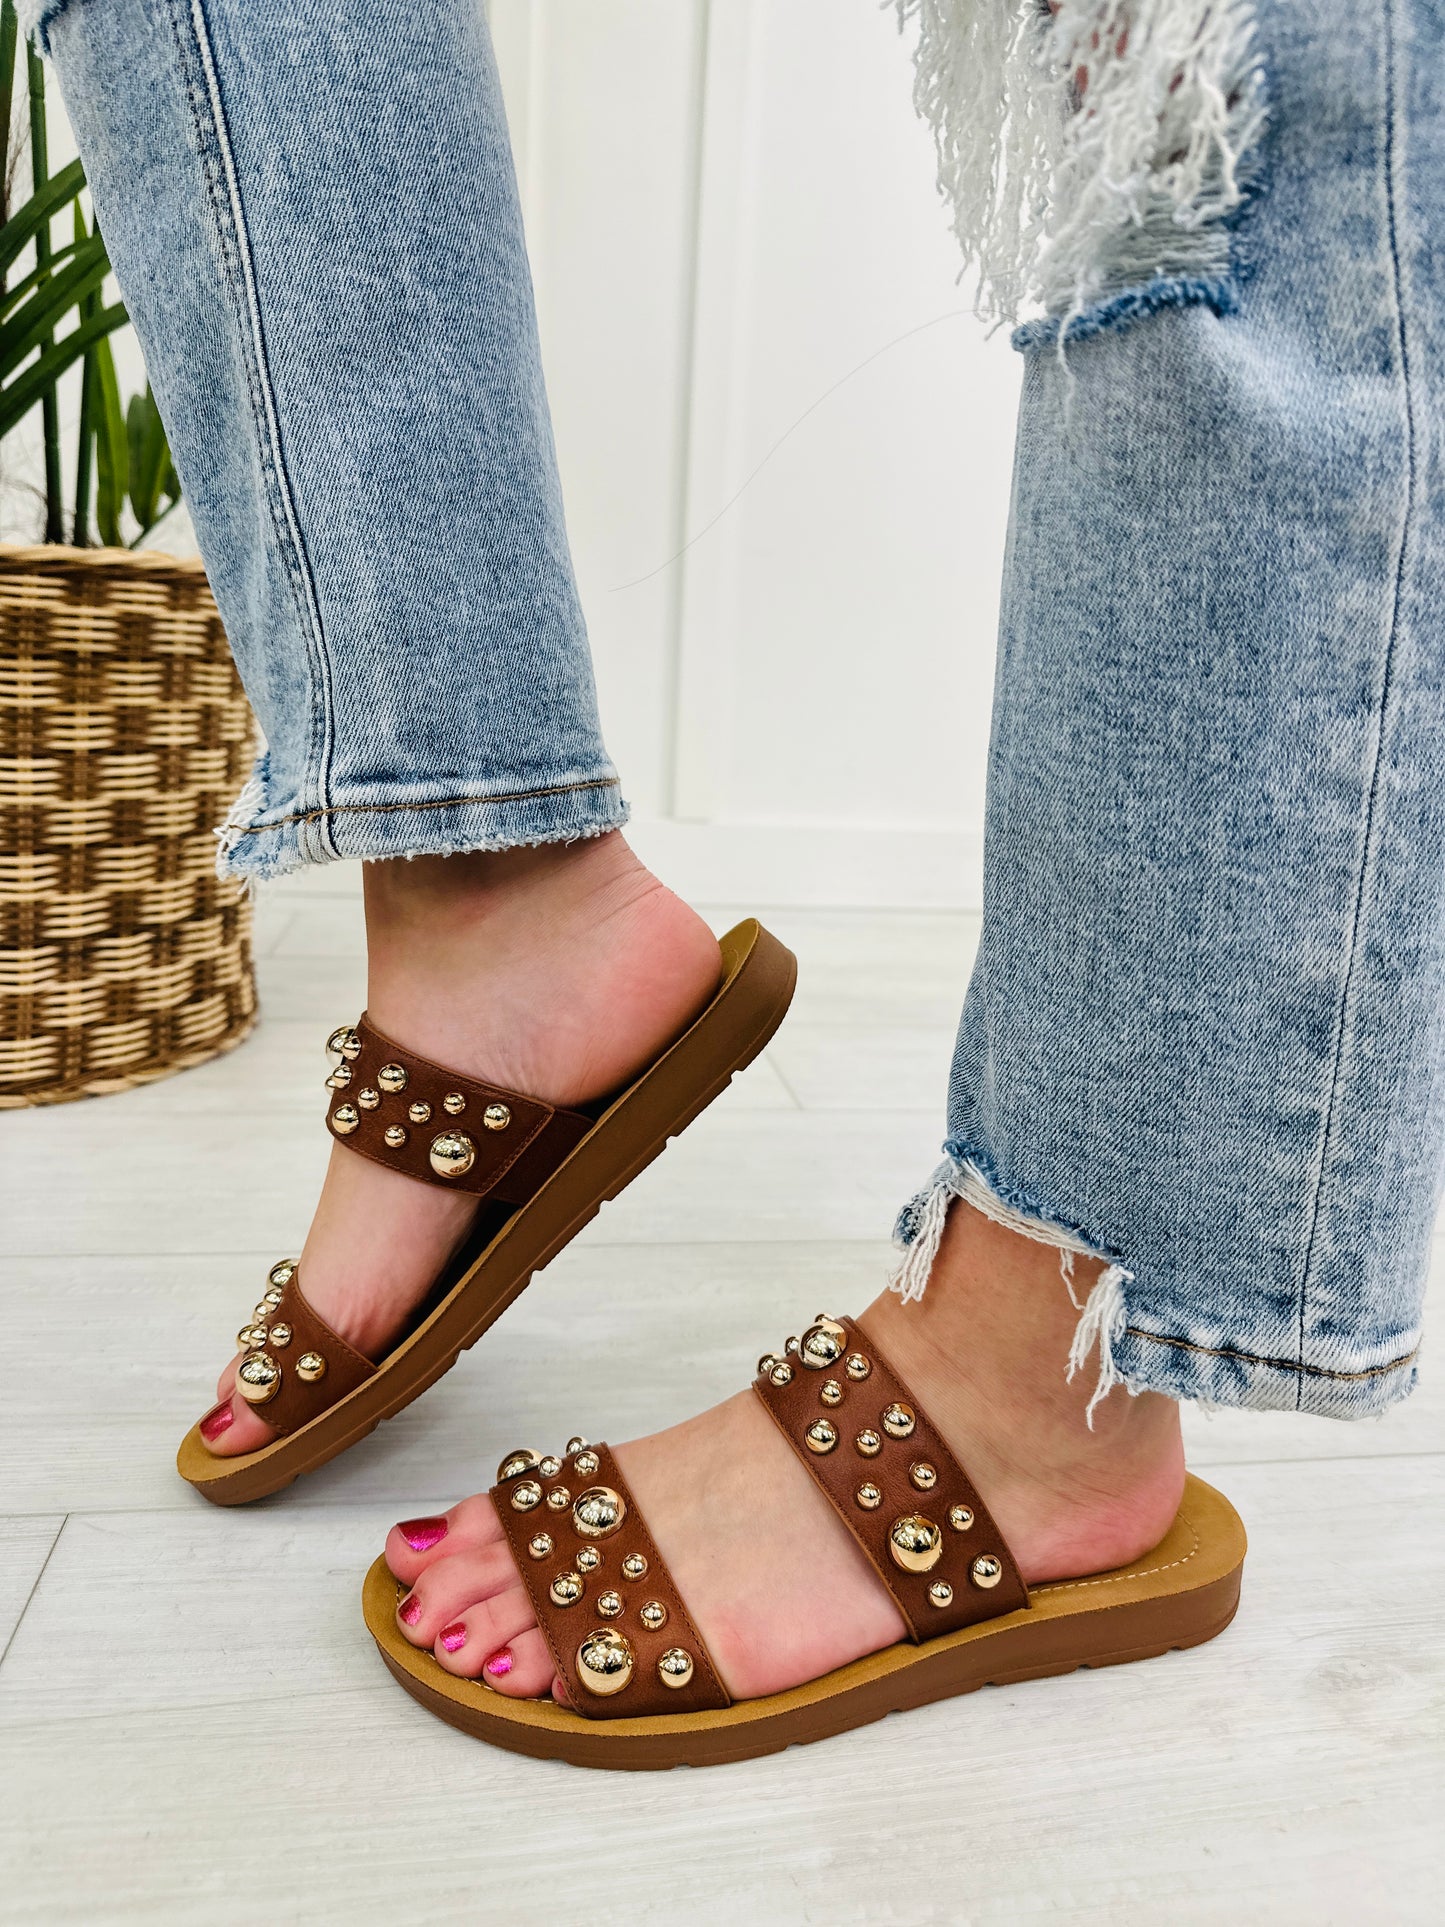 Being The Moment Sandals In Cognac